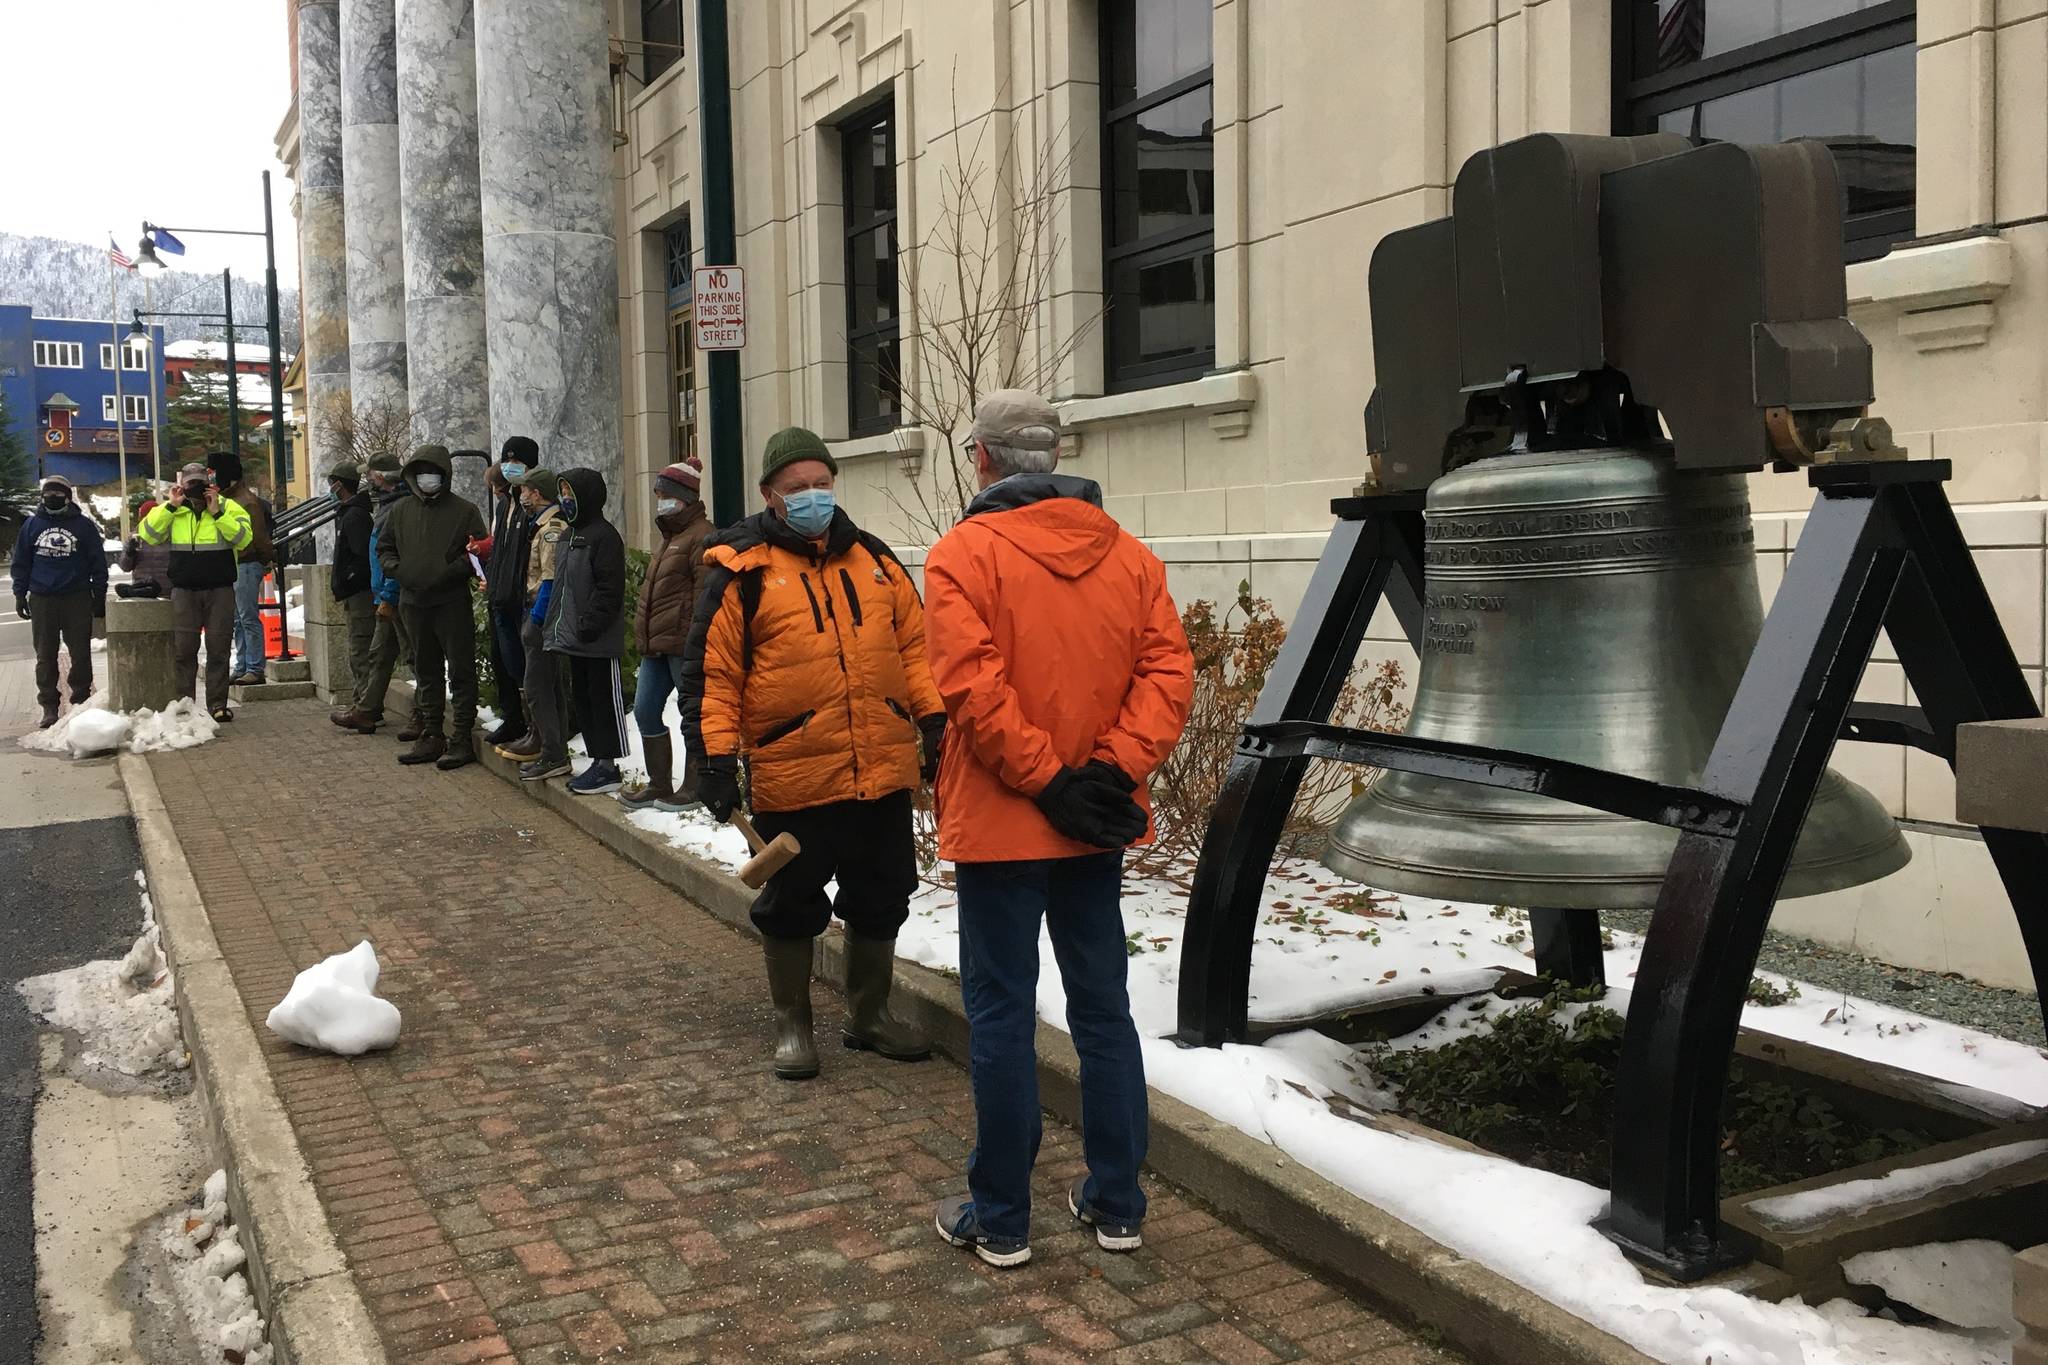 Craig Wilson, president of the Juneau chapter of Veterans for Peace, stands in front of the bell at the Alaska State Capitol as Juneau residents prepare to ring it in honor of Armistice Day, as Veterans Day was previously known on Nov. 11, 2020. (Michael S. Lockett / Juneau Empire)